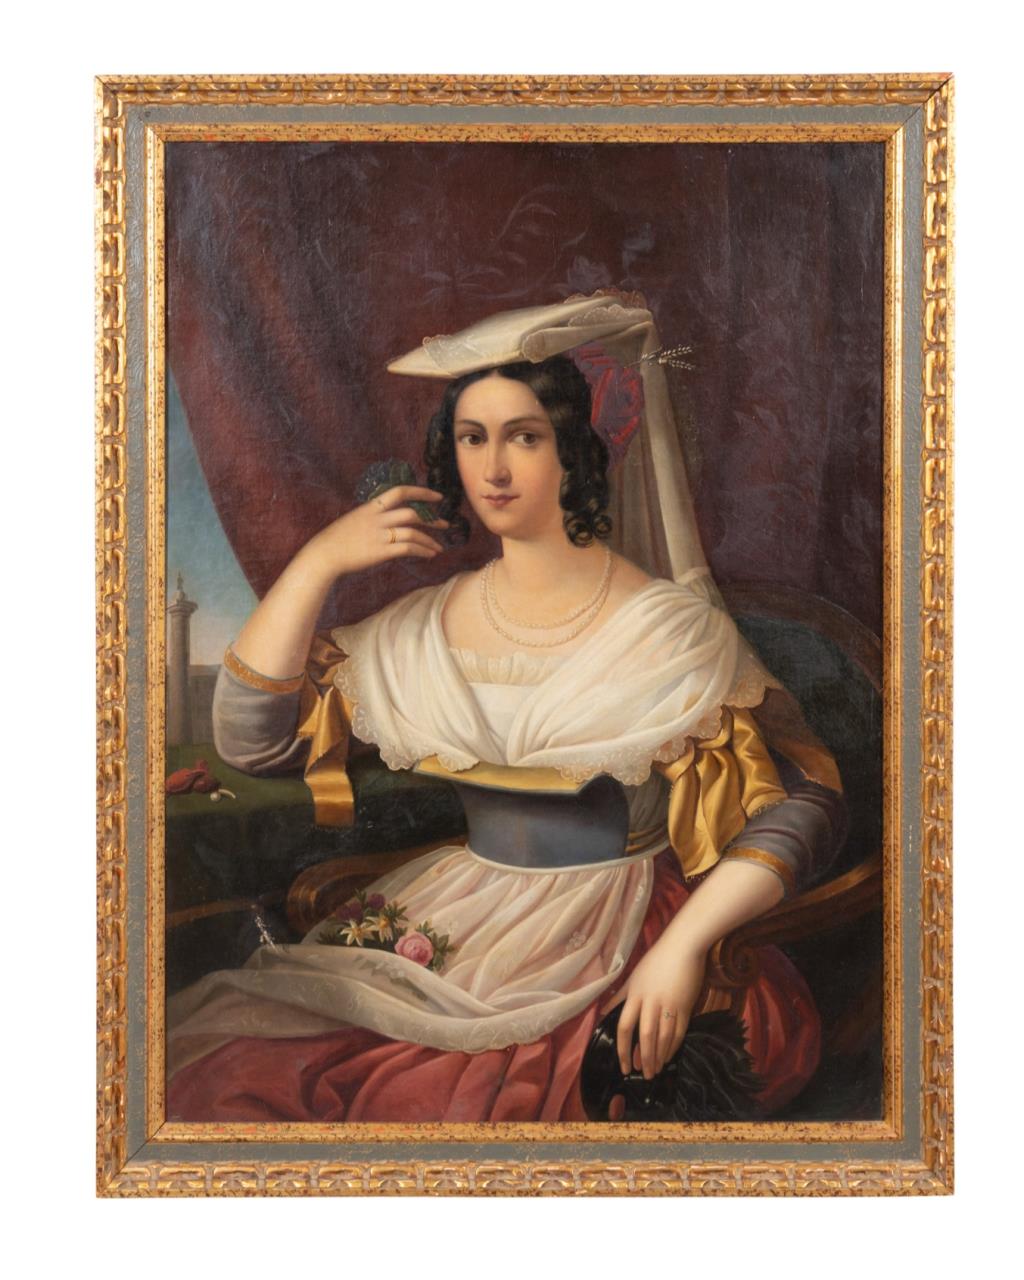 19TH C PORTRAIT OF A WOMAN FROM 2fa41d